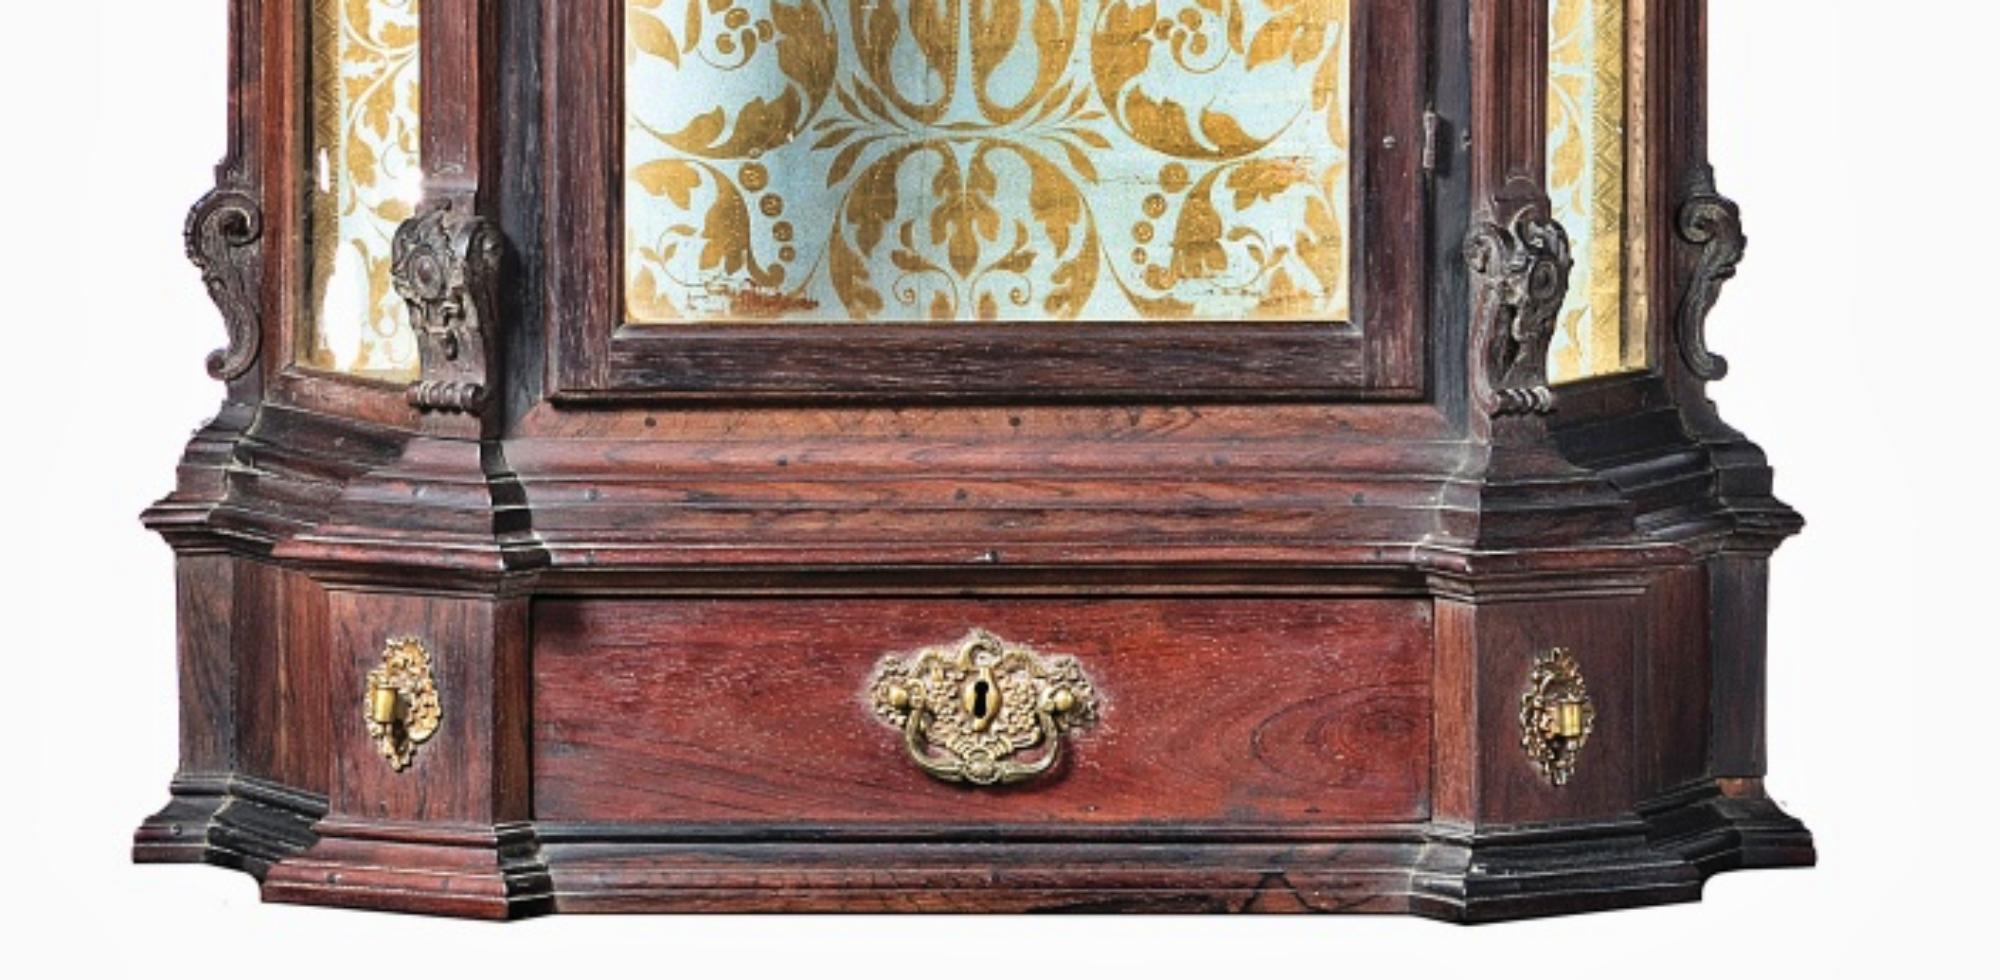 Portuguese Oratory
18th century. 
Carved wood. 
Palisander wood
Decoration with interrupted pediments, scrolls, floral motifs, plant windings and pilasters. 
Door and glazed edges with a drawer. 
Gold painted interior. 
Dimensions: (oratory)